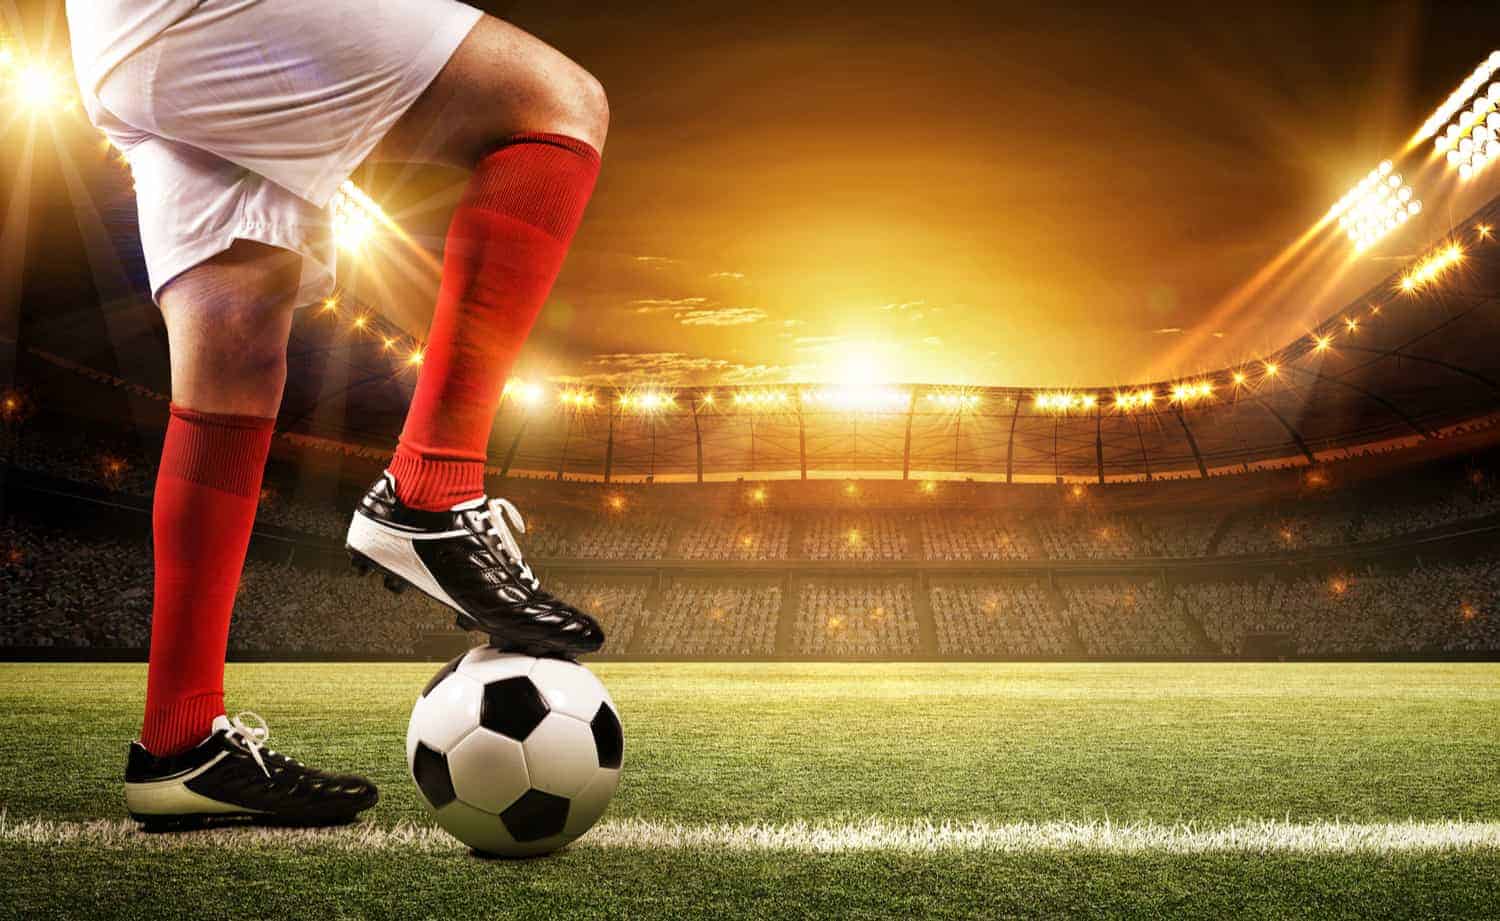 What Are The Advantages Of Becoming A Host For An Online Football Betting Company?